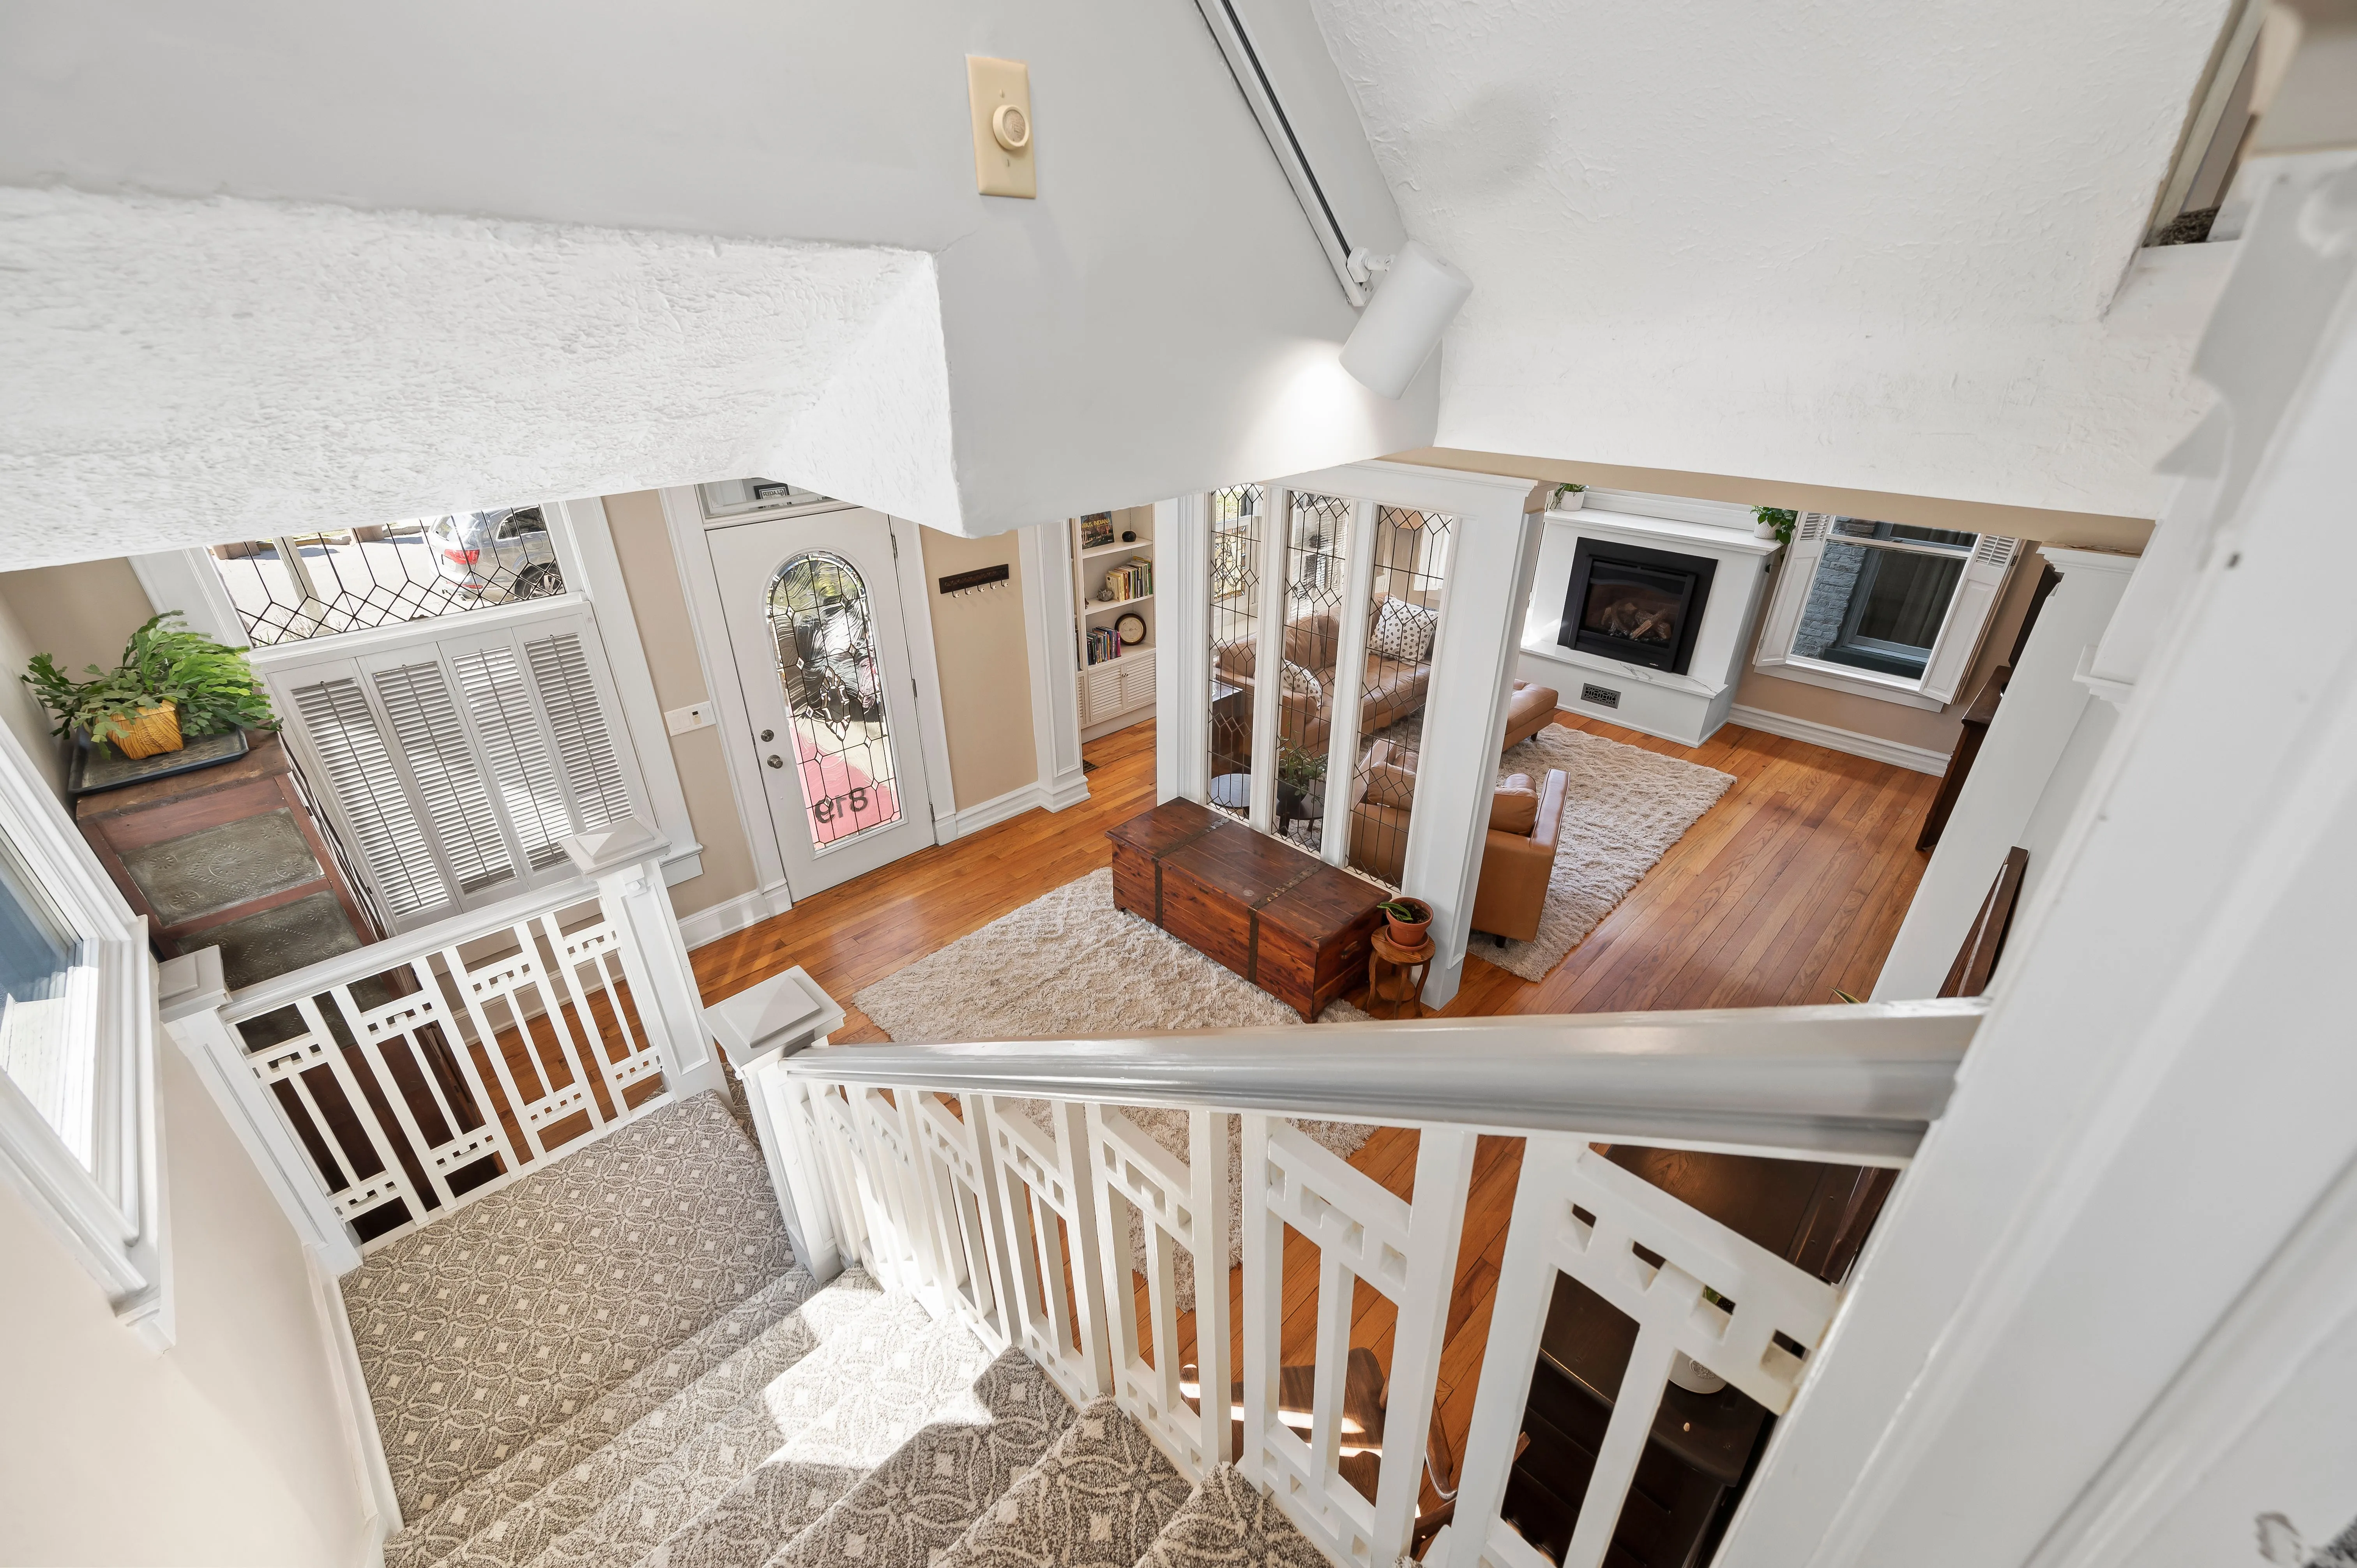 Overhead view of a multi-level home interior with white railing, wood flooring, and a glimpse into the living areas.